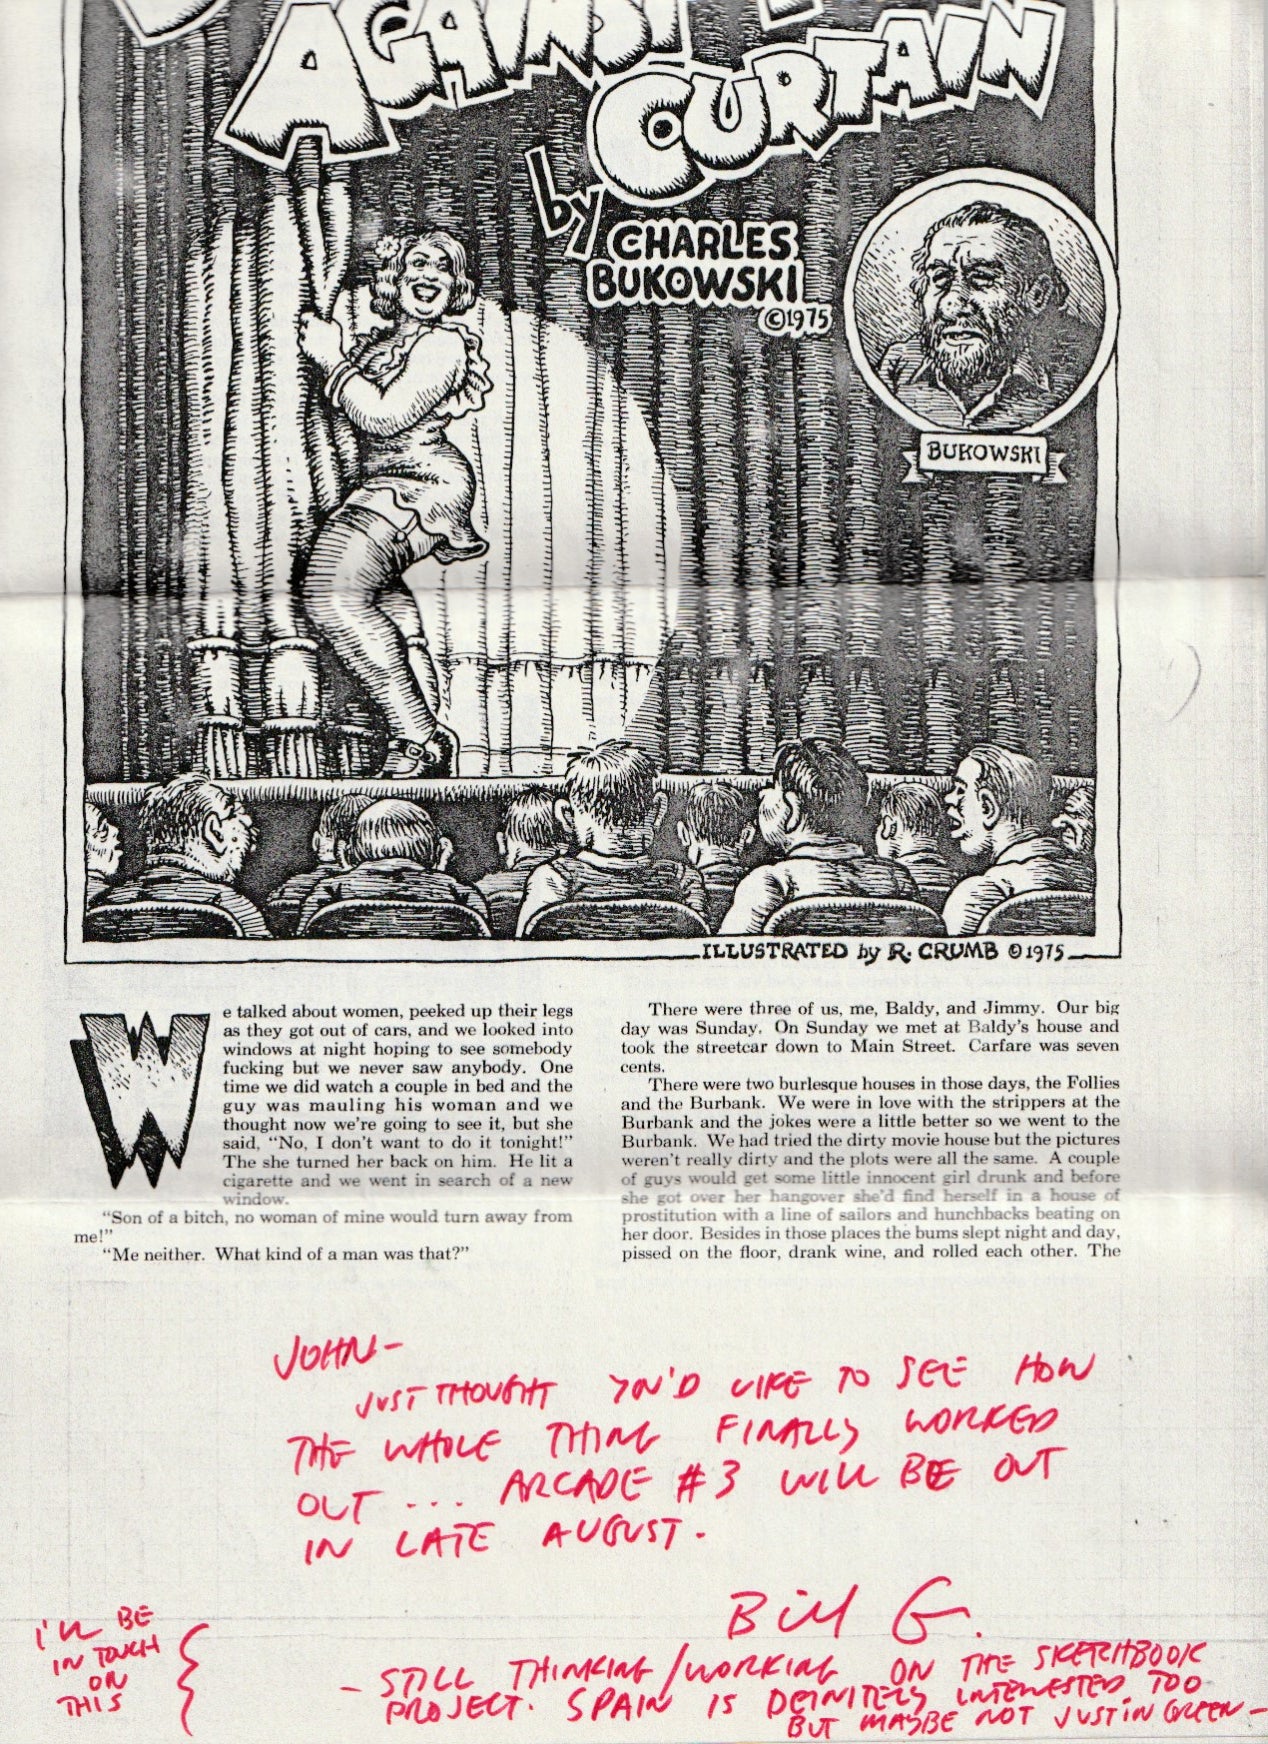 Signed Issue of Arcade 3 with a Bukowski Short-Story Illustrated by R. Crumb, Photocopies of Pre-Production Layouts with a Signed Note From Bill Griffith to John Martin, Promotional Flyer From Arcade for upcoming Bukowski/Crumb Issue.